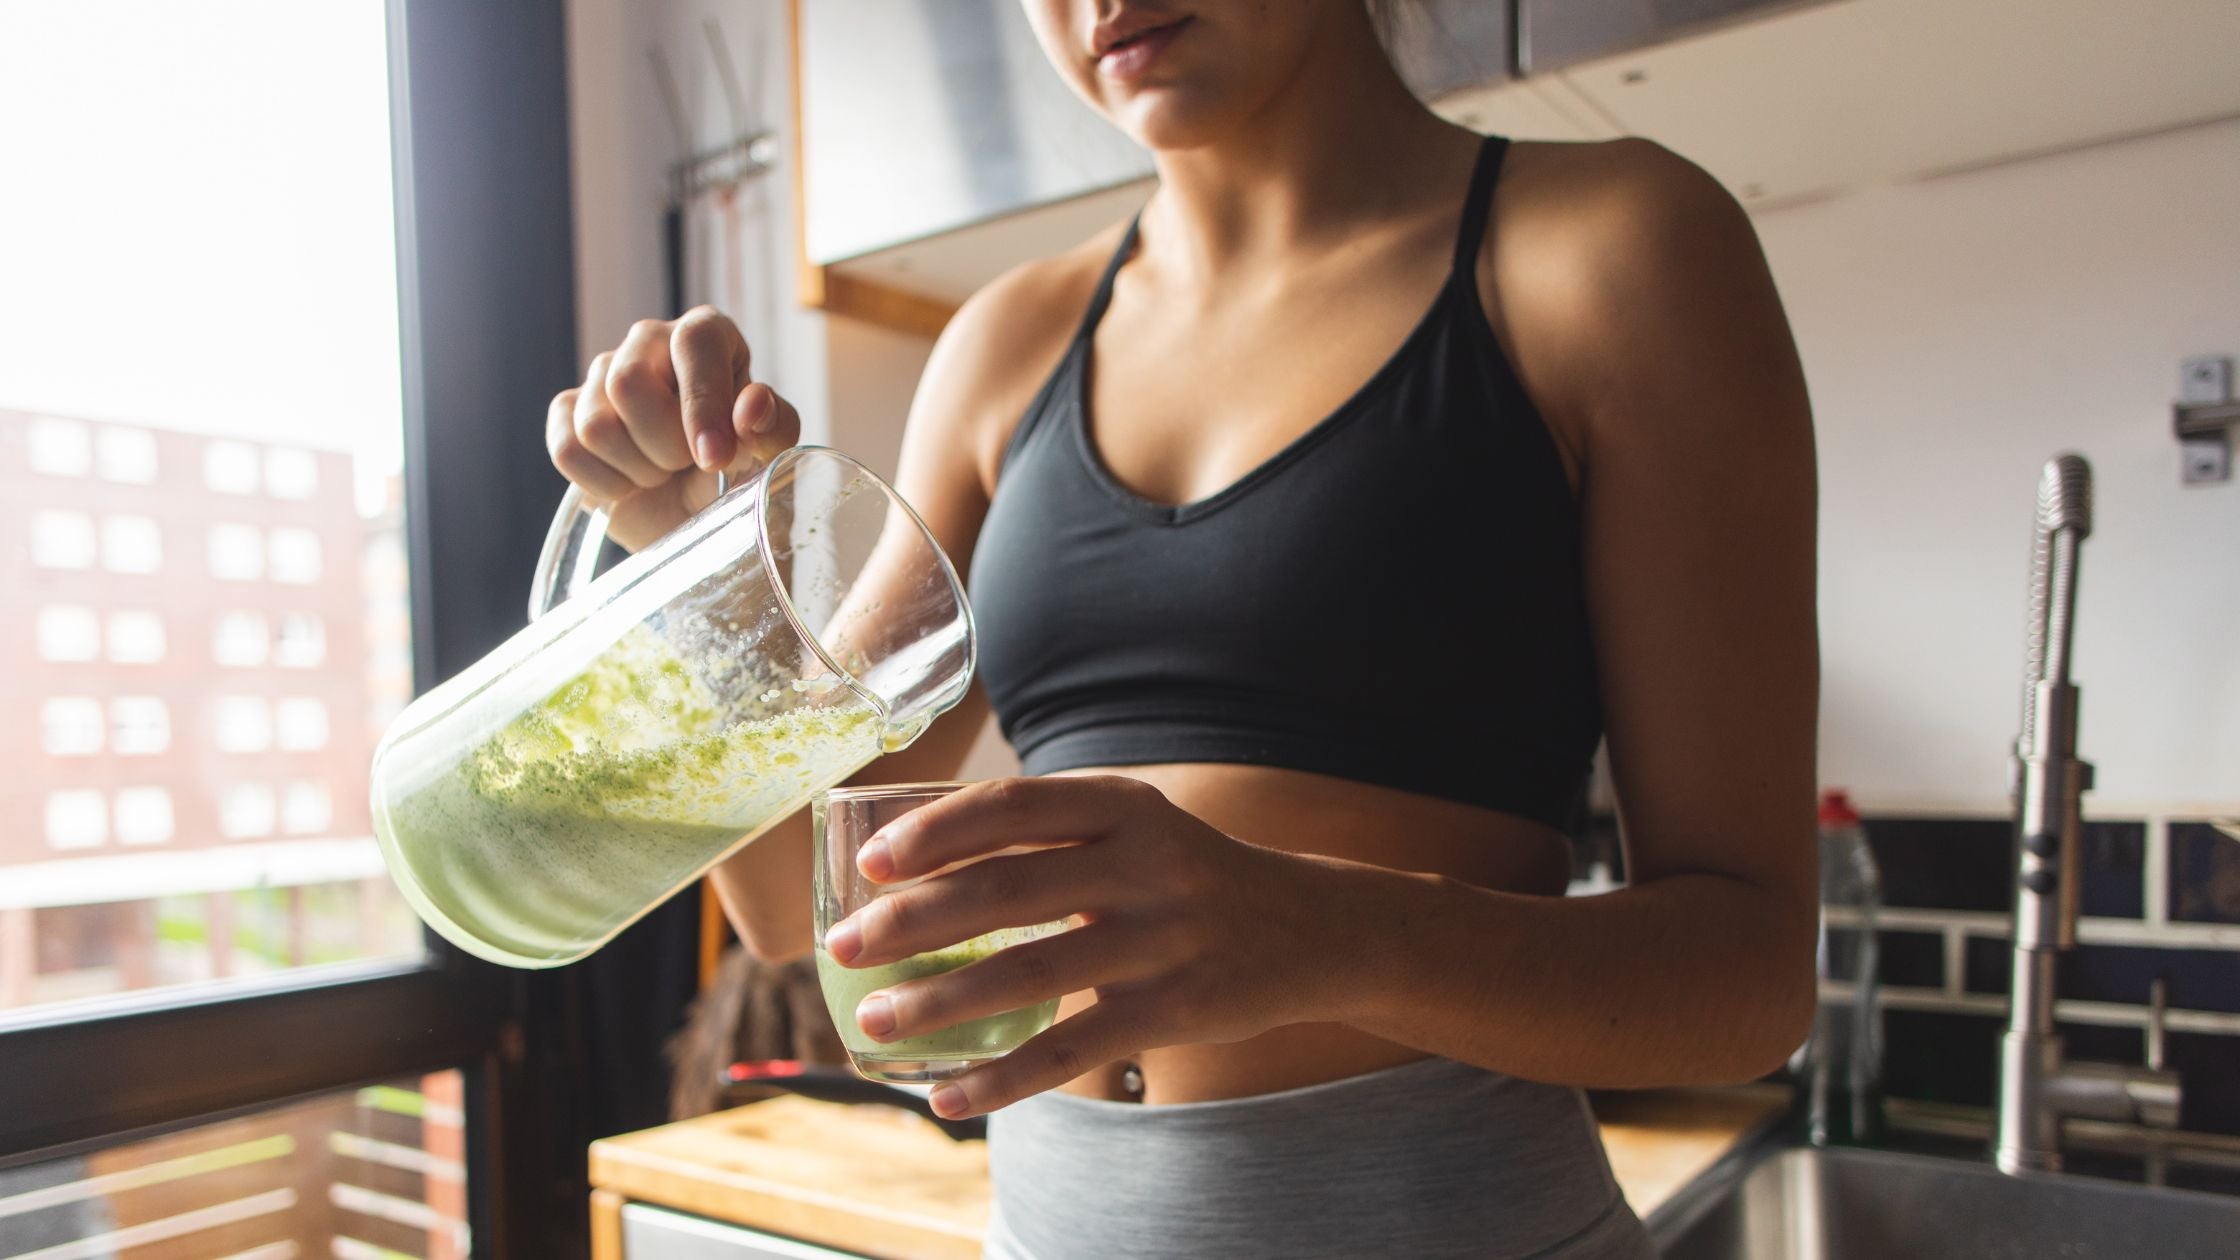 A young woman fills up her glass with a superfood smoothie made with PINES Wheat Grass powder.